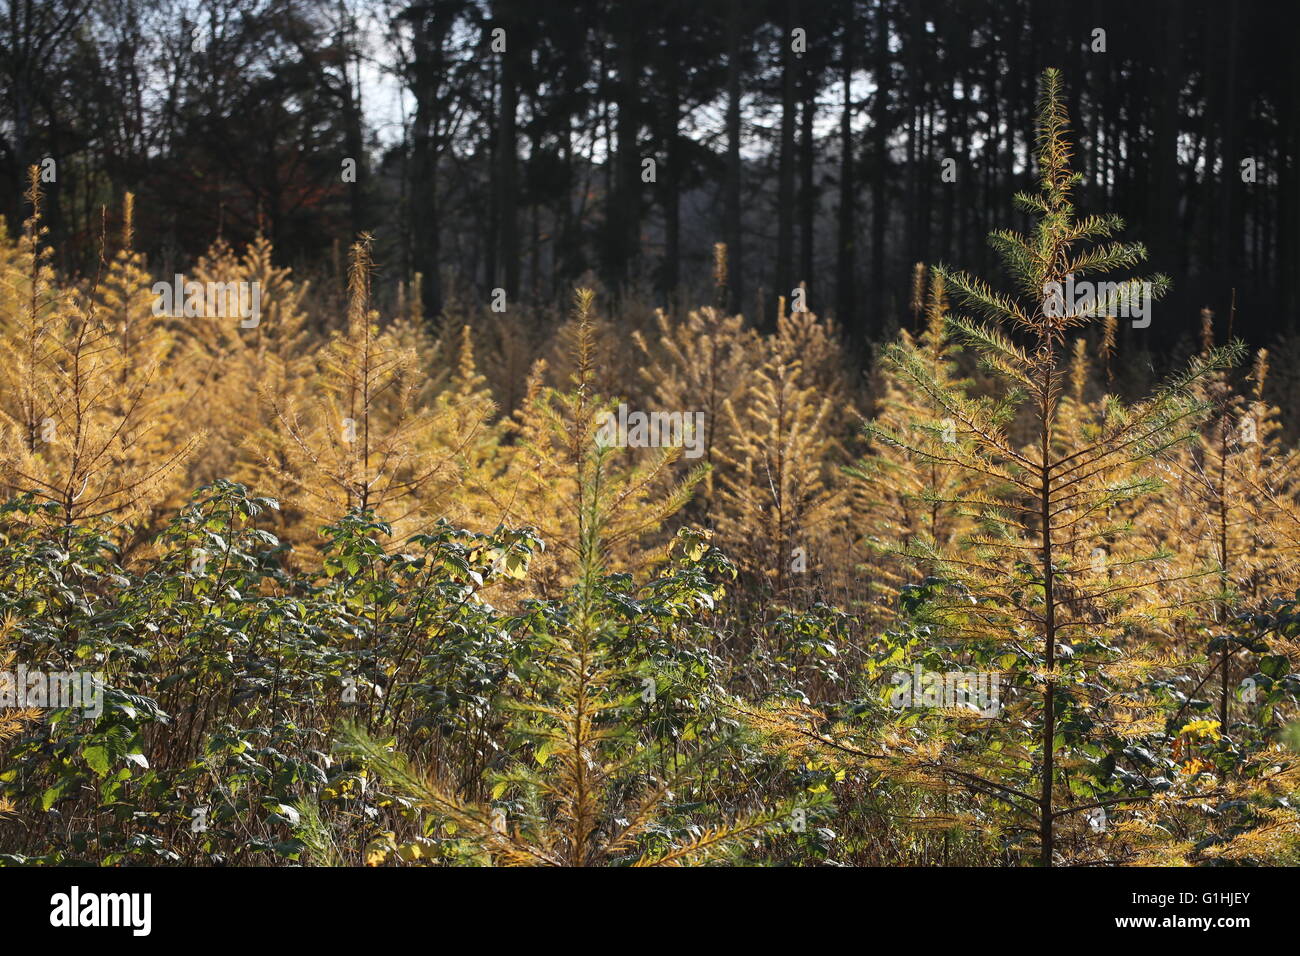 Plantation of spruce trees (Picea) in autumn. Stock Photo